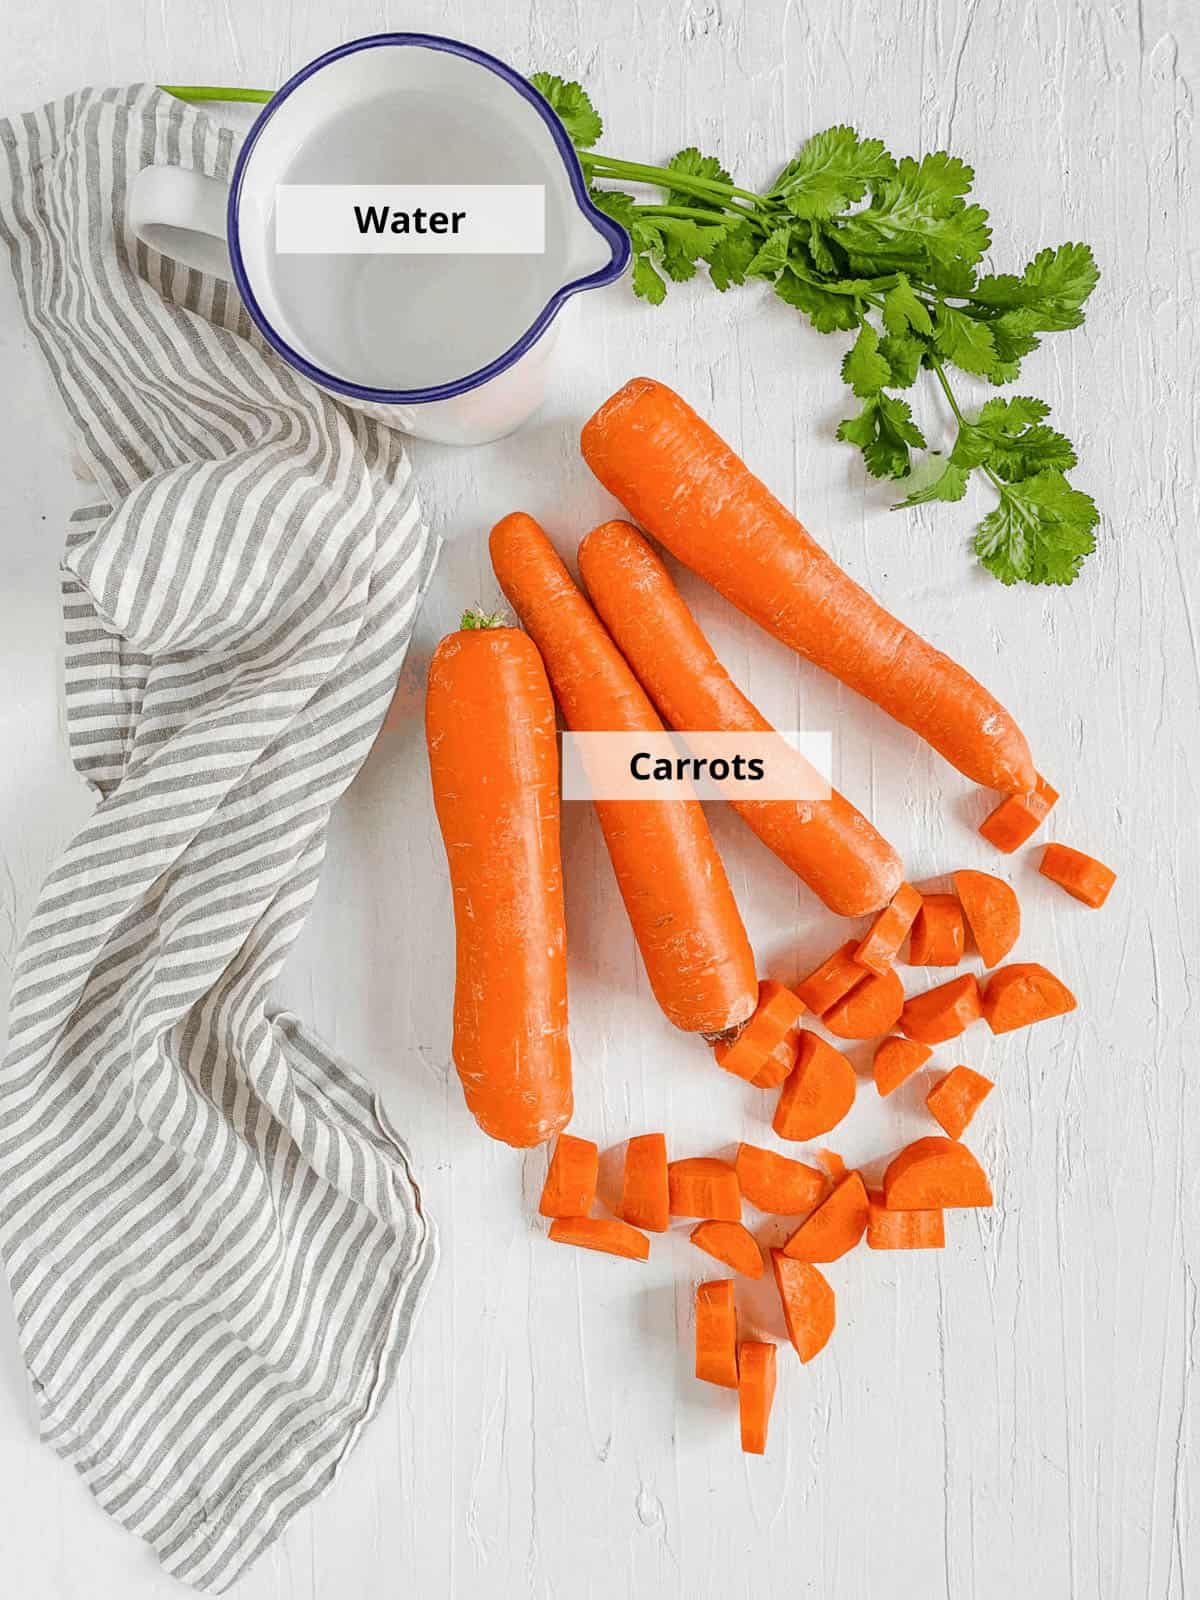 Ingredients for carrot puree recipe for baby on a white background.